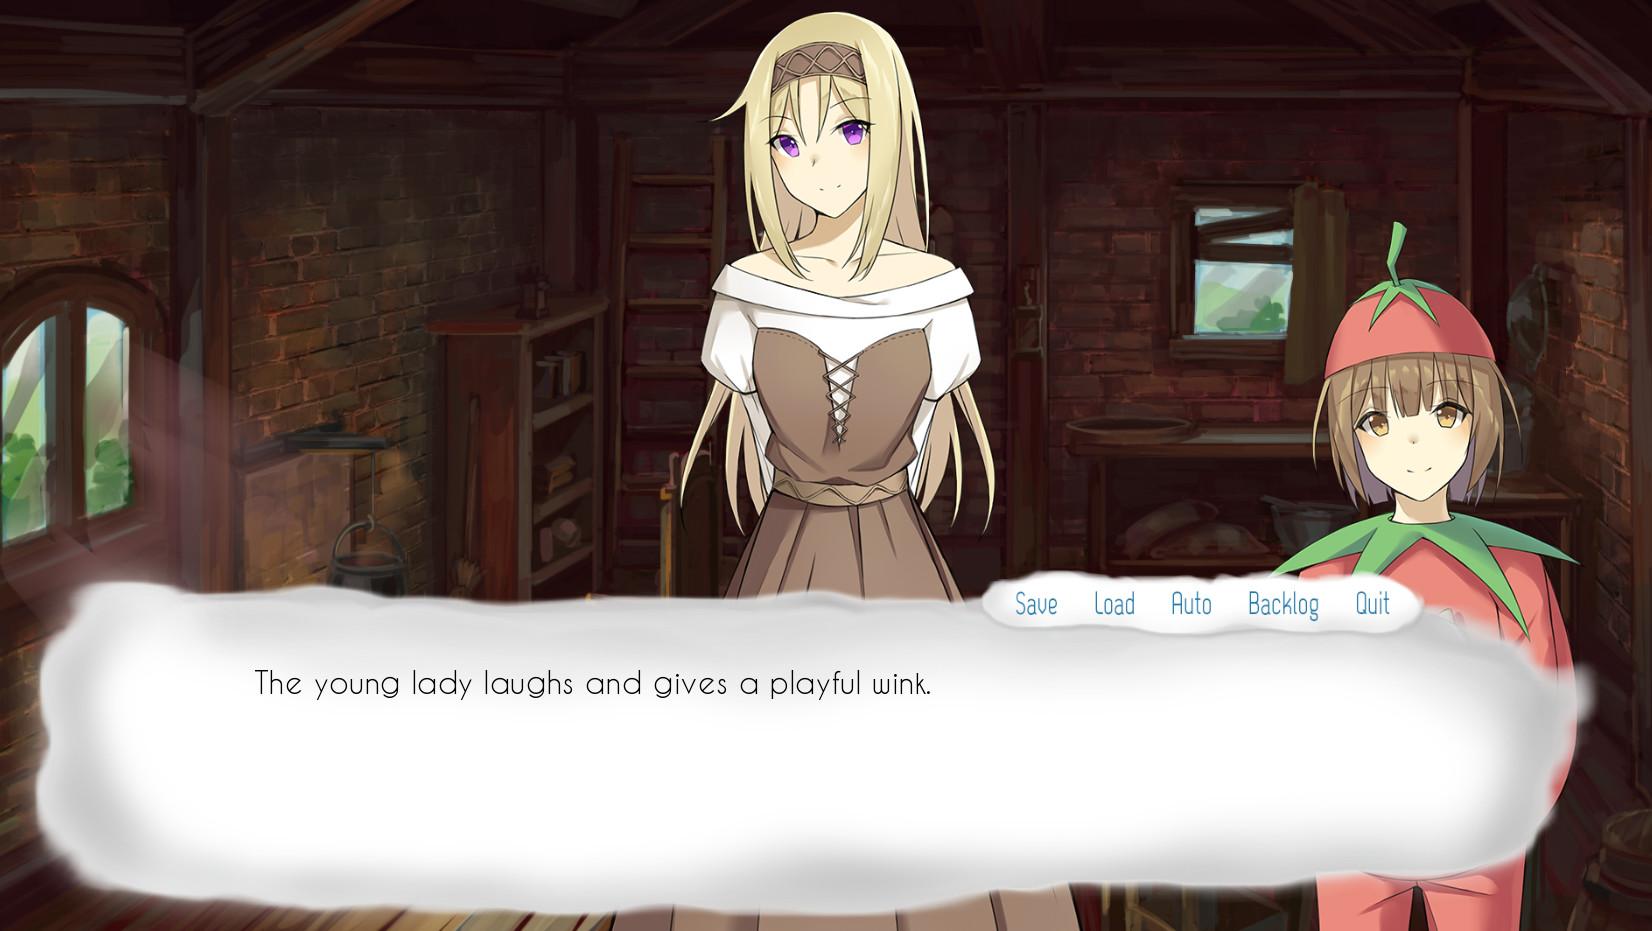 Screenshot №2 from game Forgotten, Not Lost - A Kinetic Novel